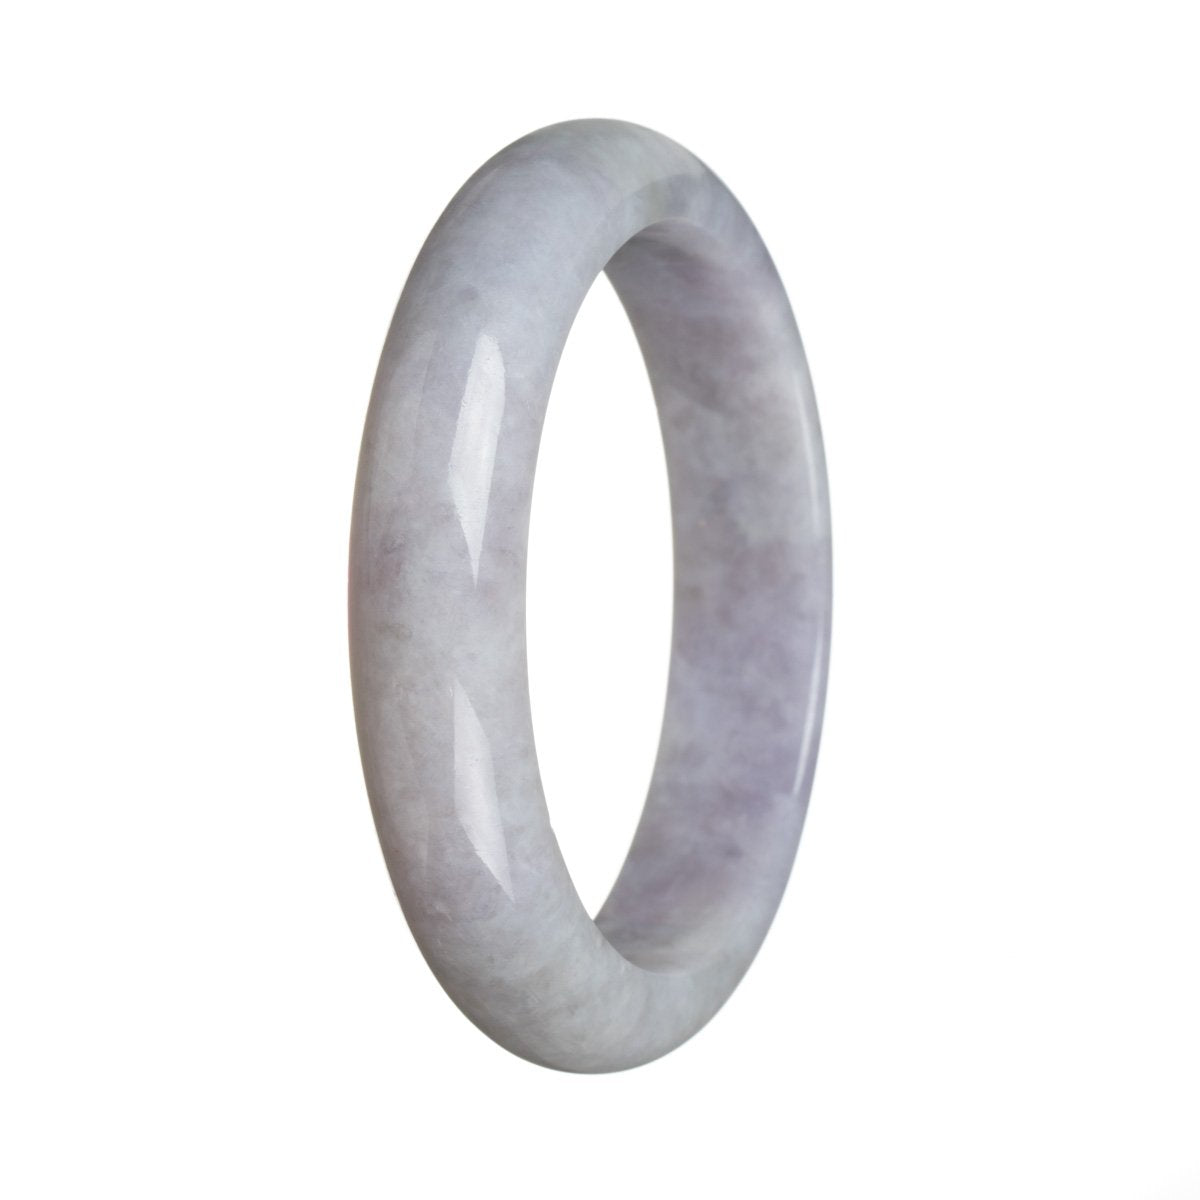 Close-up image of a beautiful lavender and green bangle bracelet made of untreated Burma Jade, with a unique half moon shape, measuring 61mm.